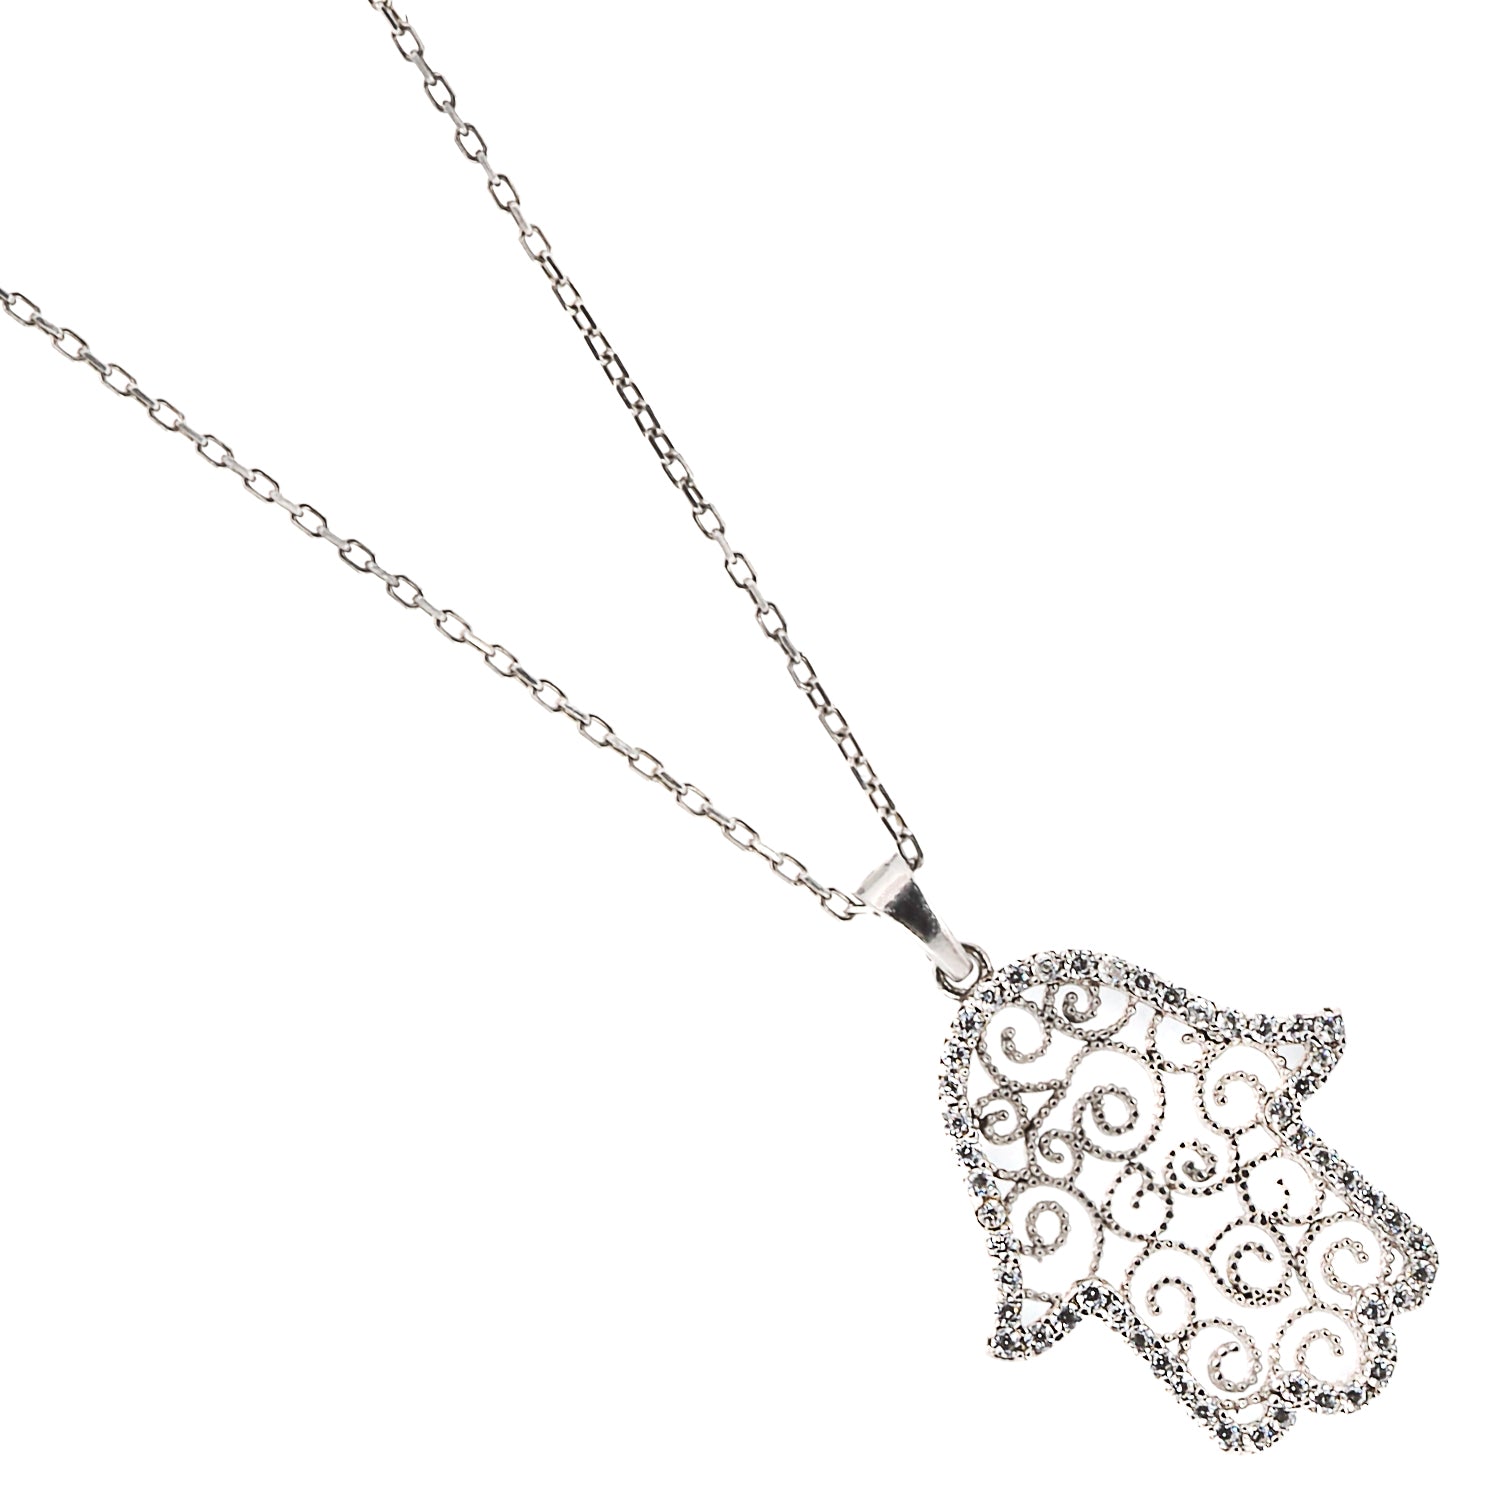 The Spiral Hamsa Necklace combines symbolism and beauty, with its sterling silver chain and CZ diamond-adorned Hamsa pendant, embodying luck, protection, and grace.